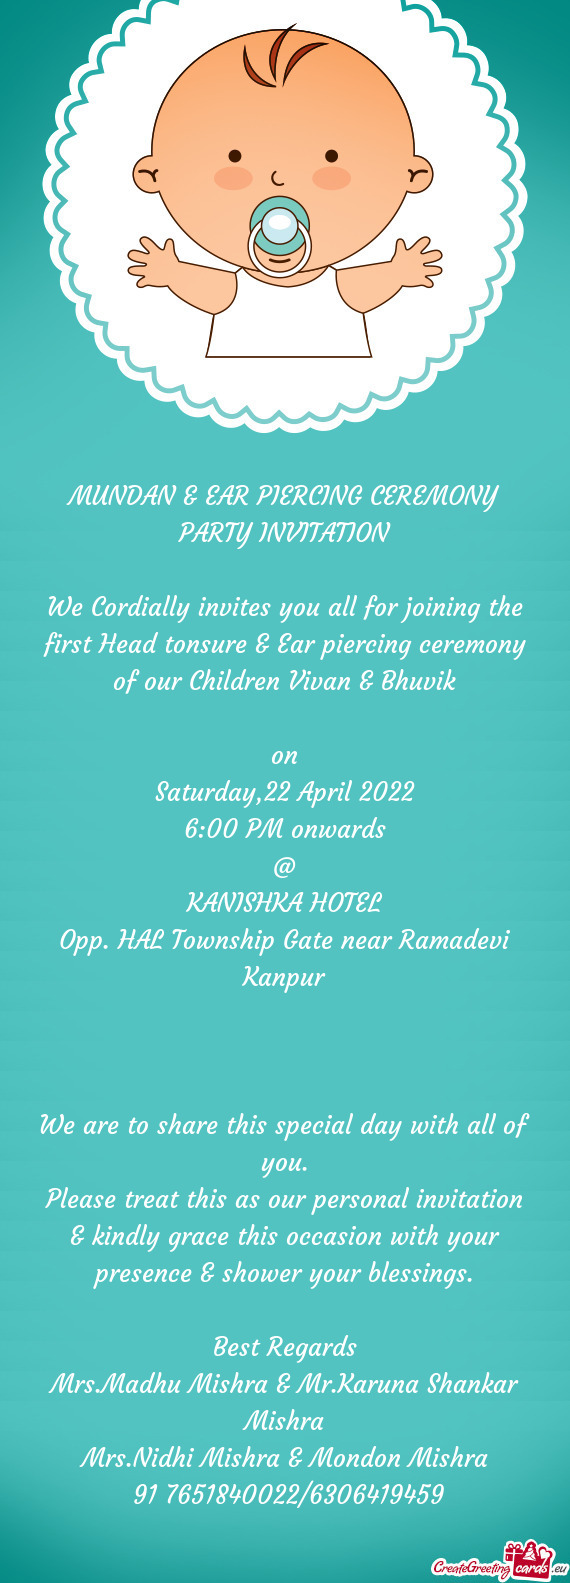 We Cordially invites you all for joining the first Head tonsure & Ear piercing ceremony of our Child